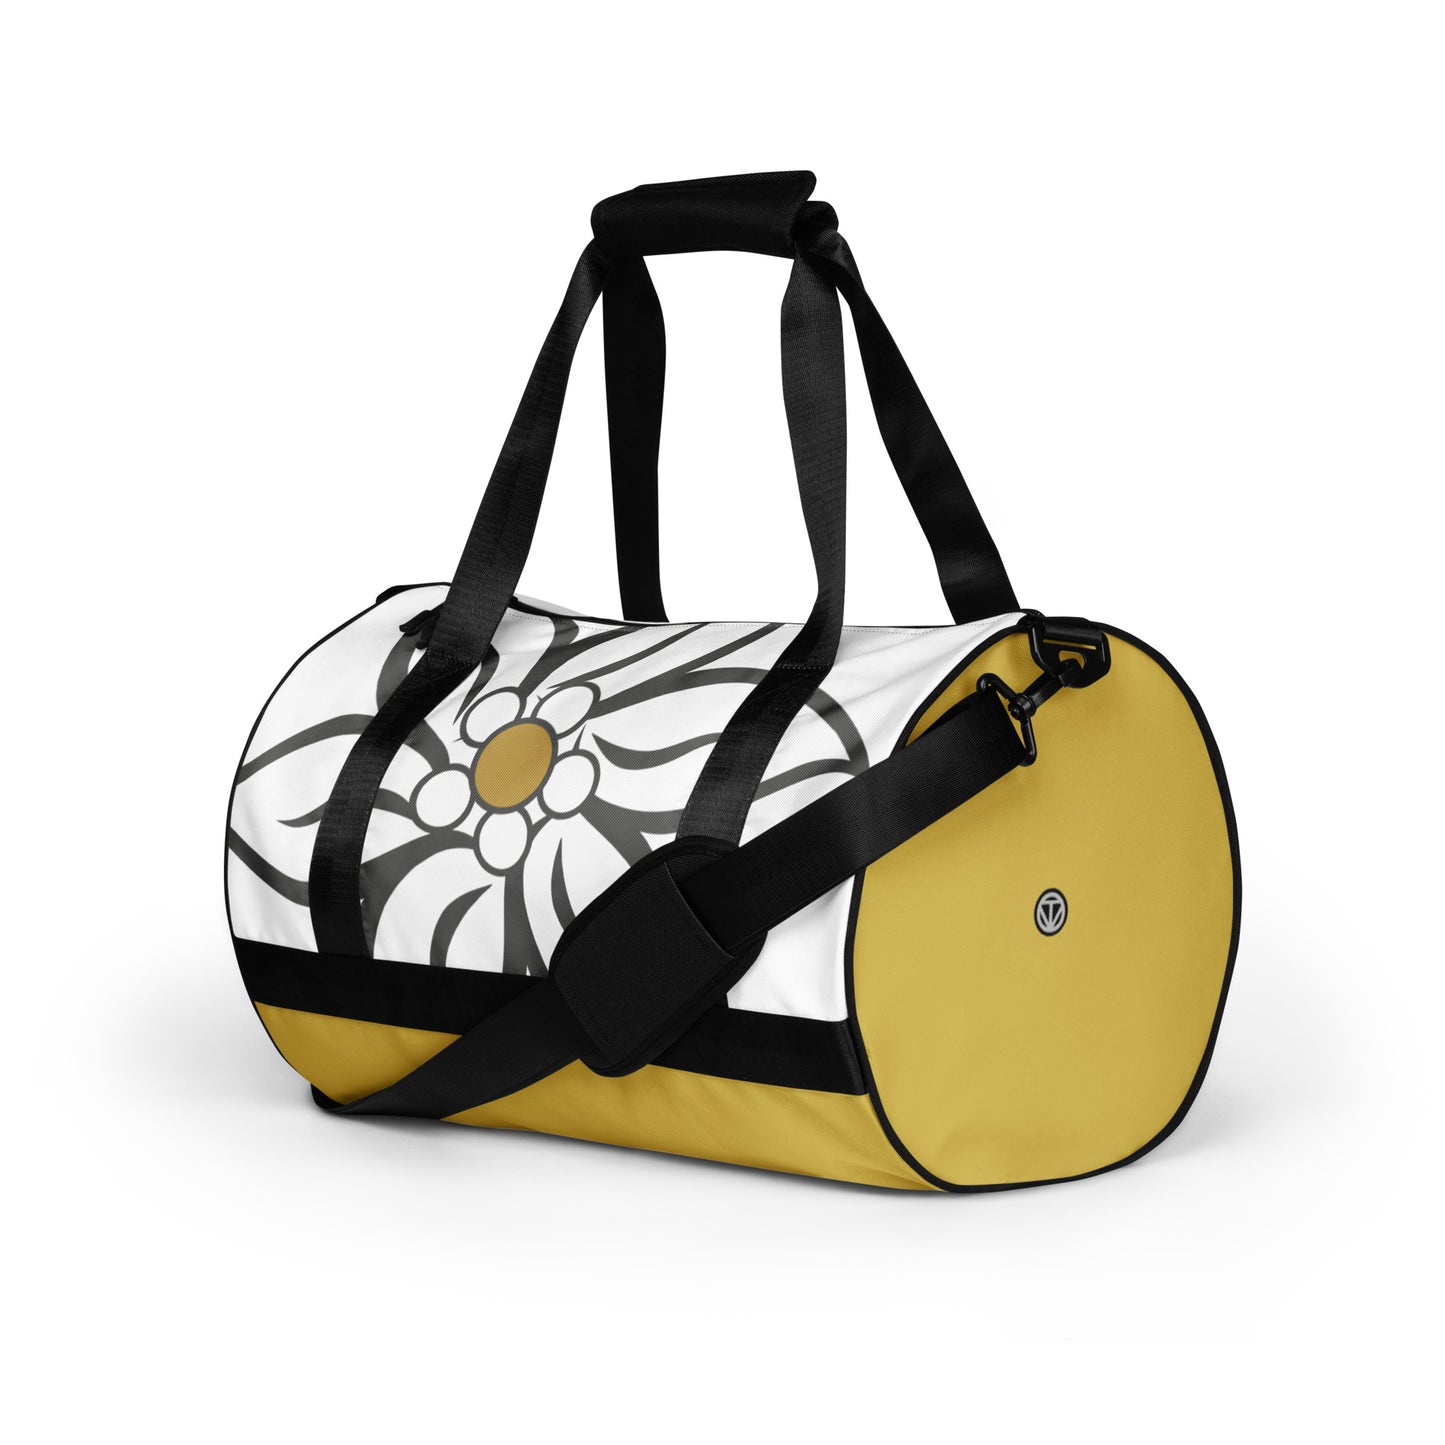 TIME OF VIBES - Sports Bag BNC - €99.00